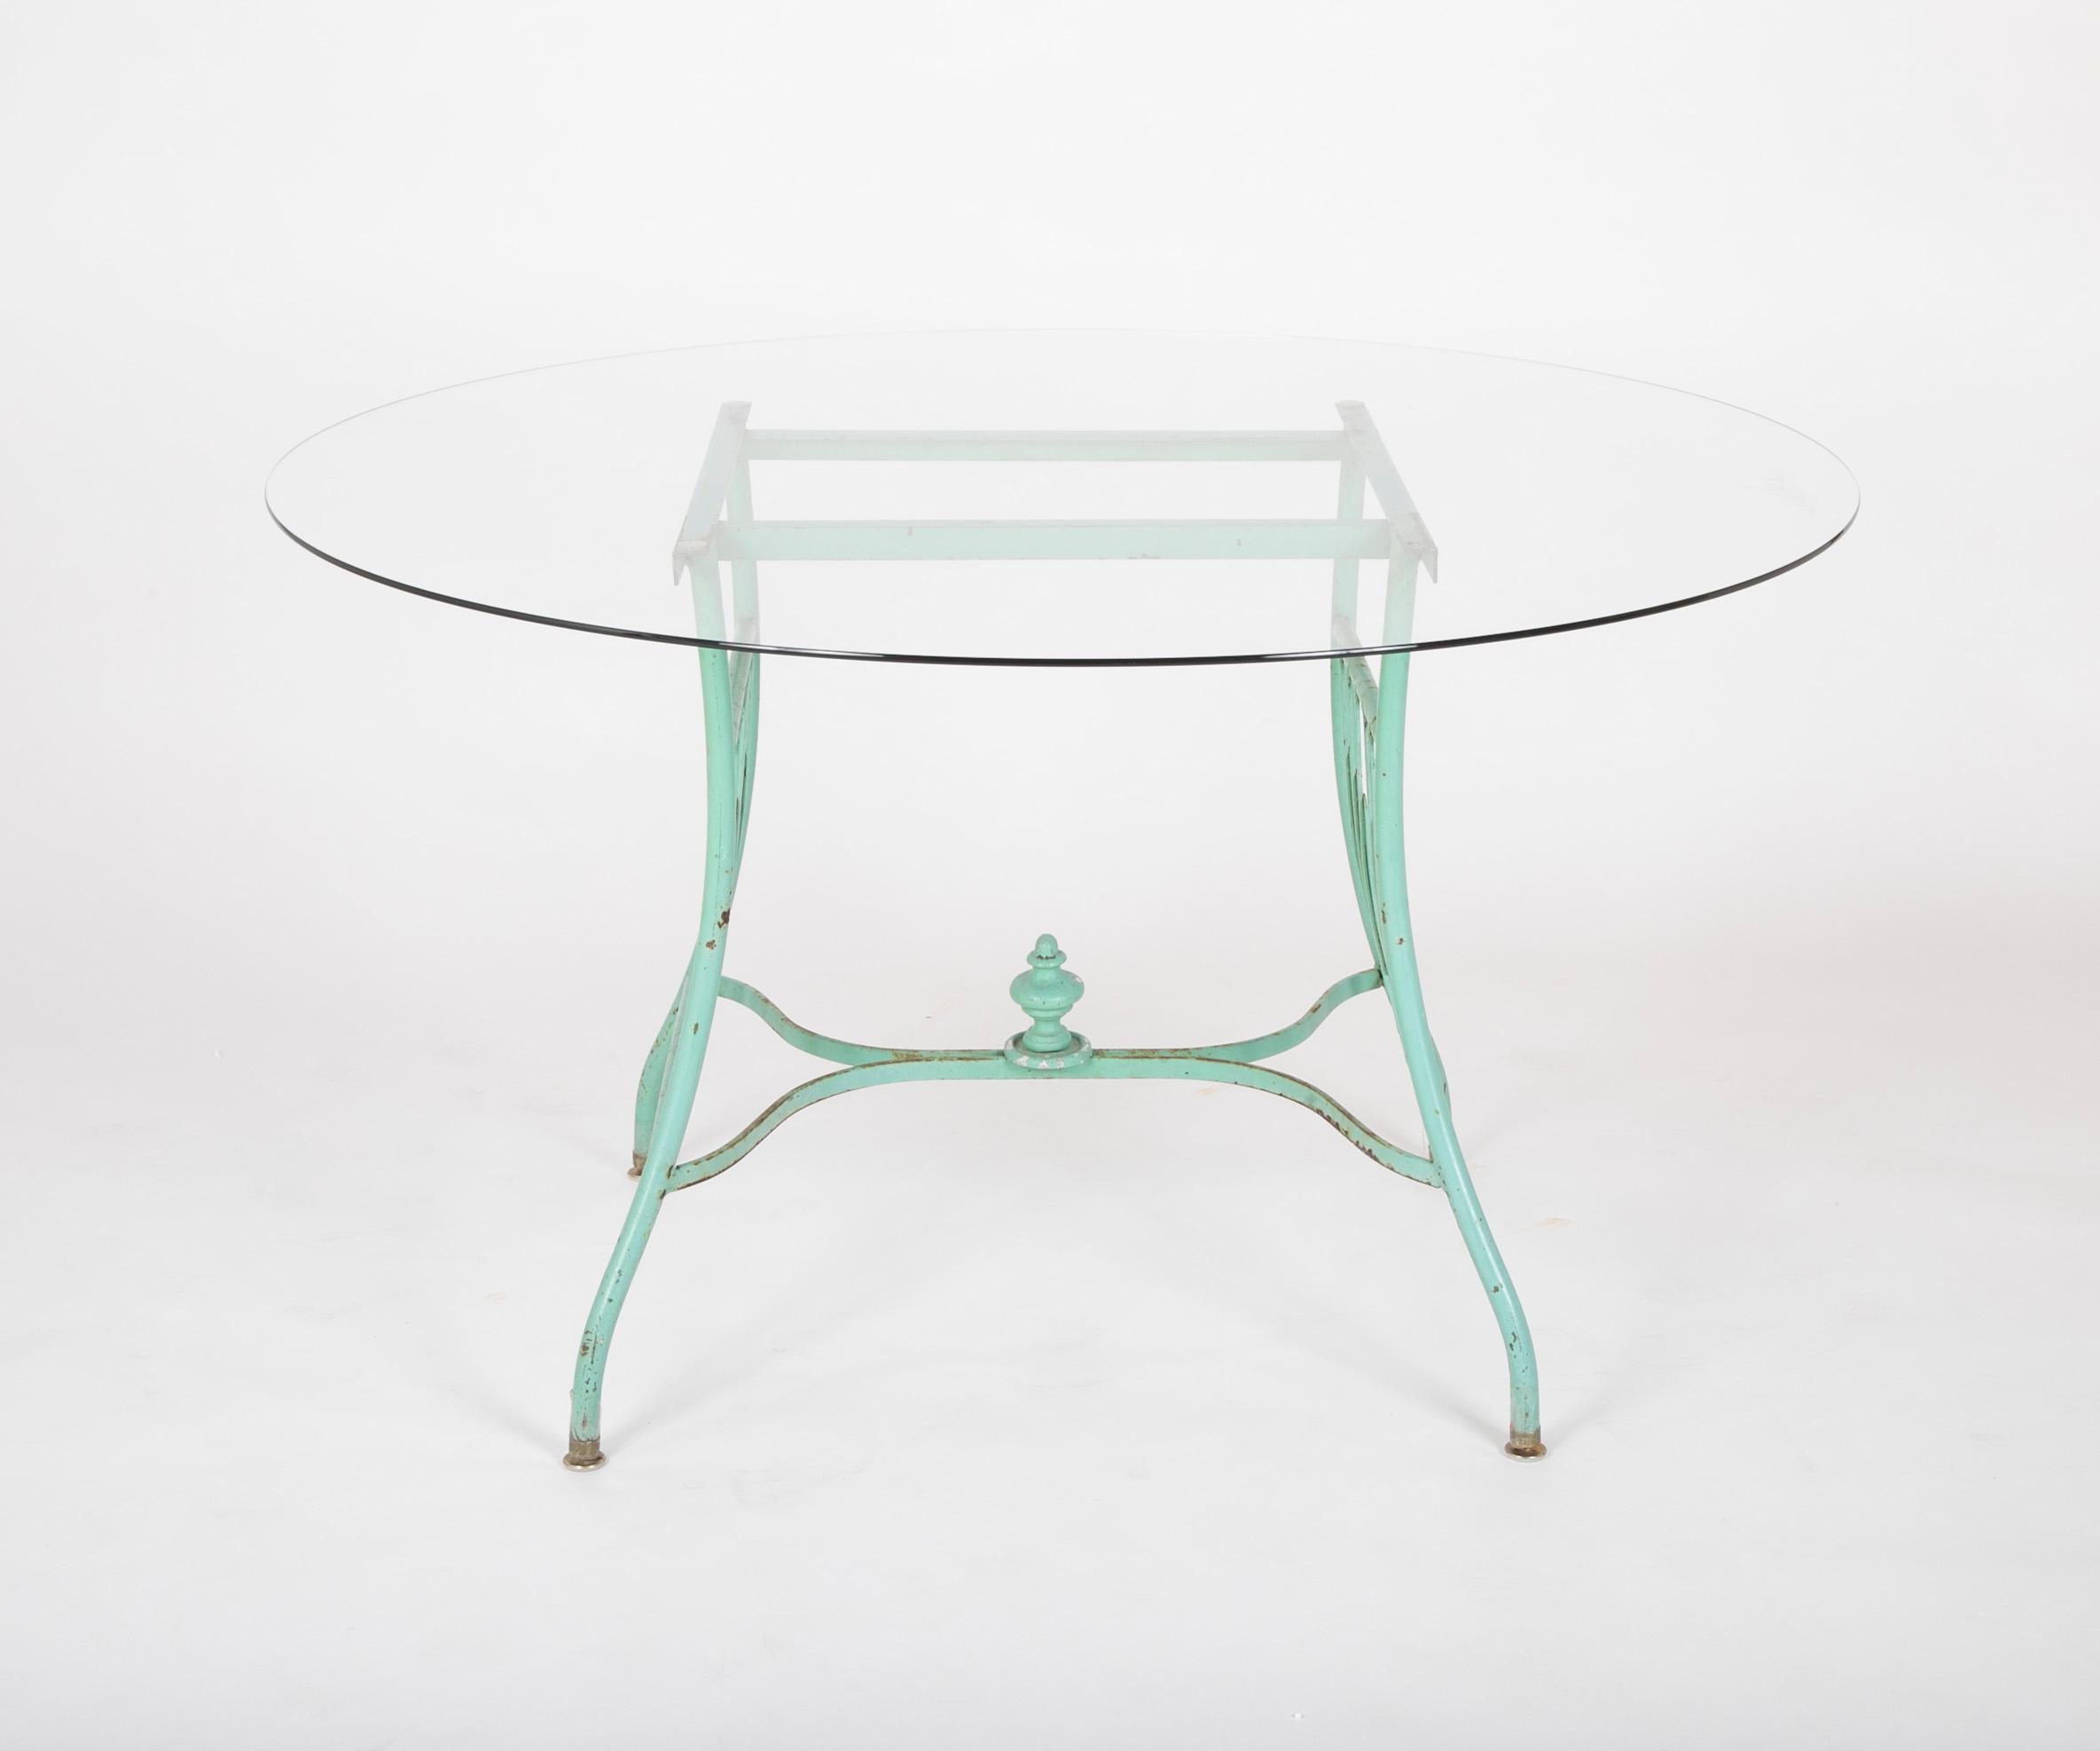 Painted 19th Century French Iron Glass Top Dining Table with Four Matching Chairs